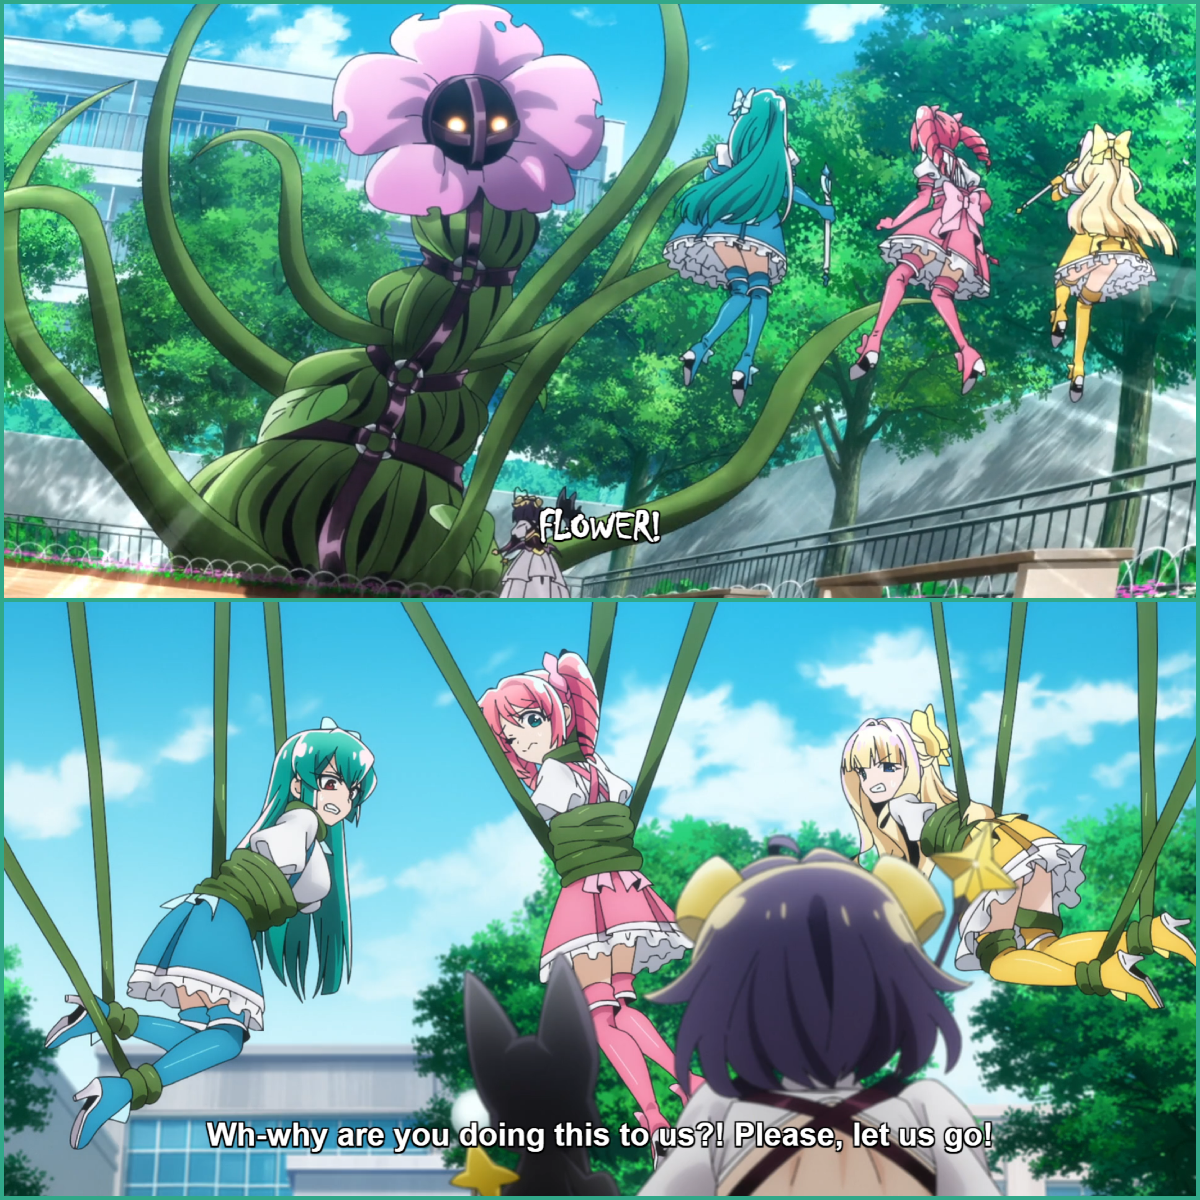 Gushing Over Magical Girls just gave the phrase "flower power" a whole new meaning.